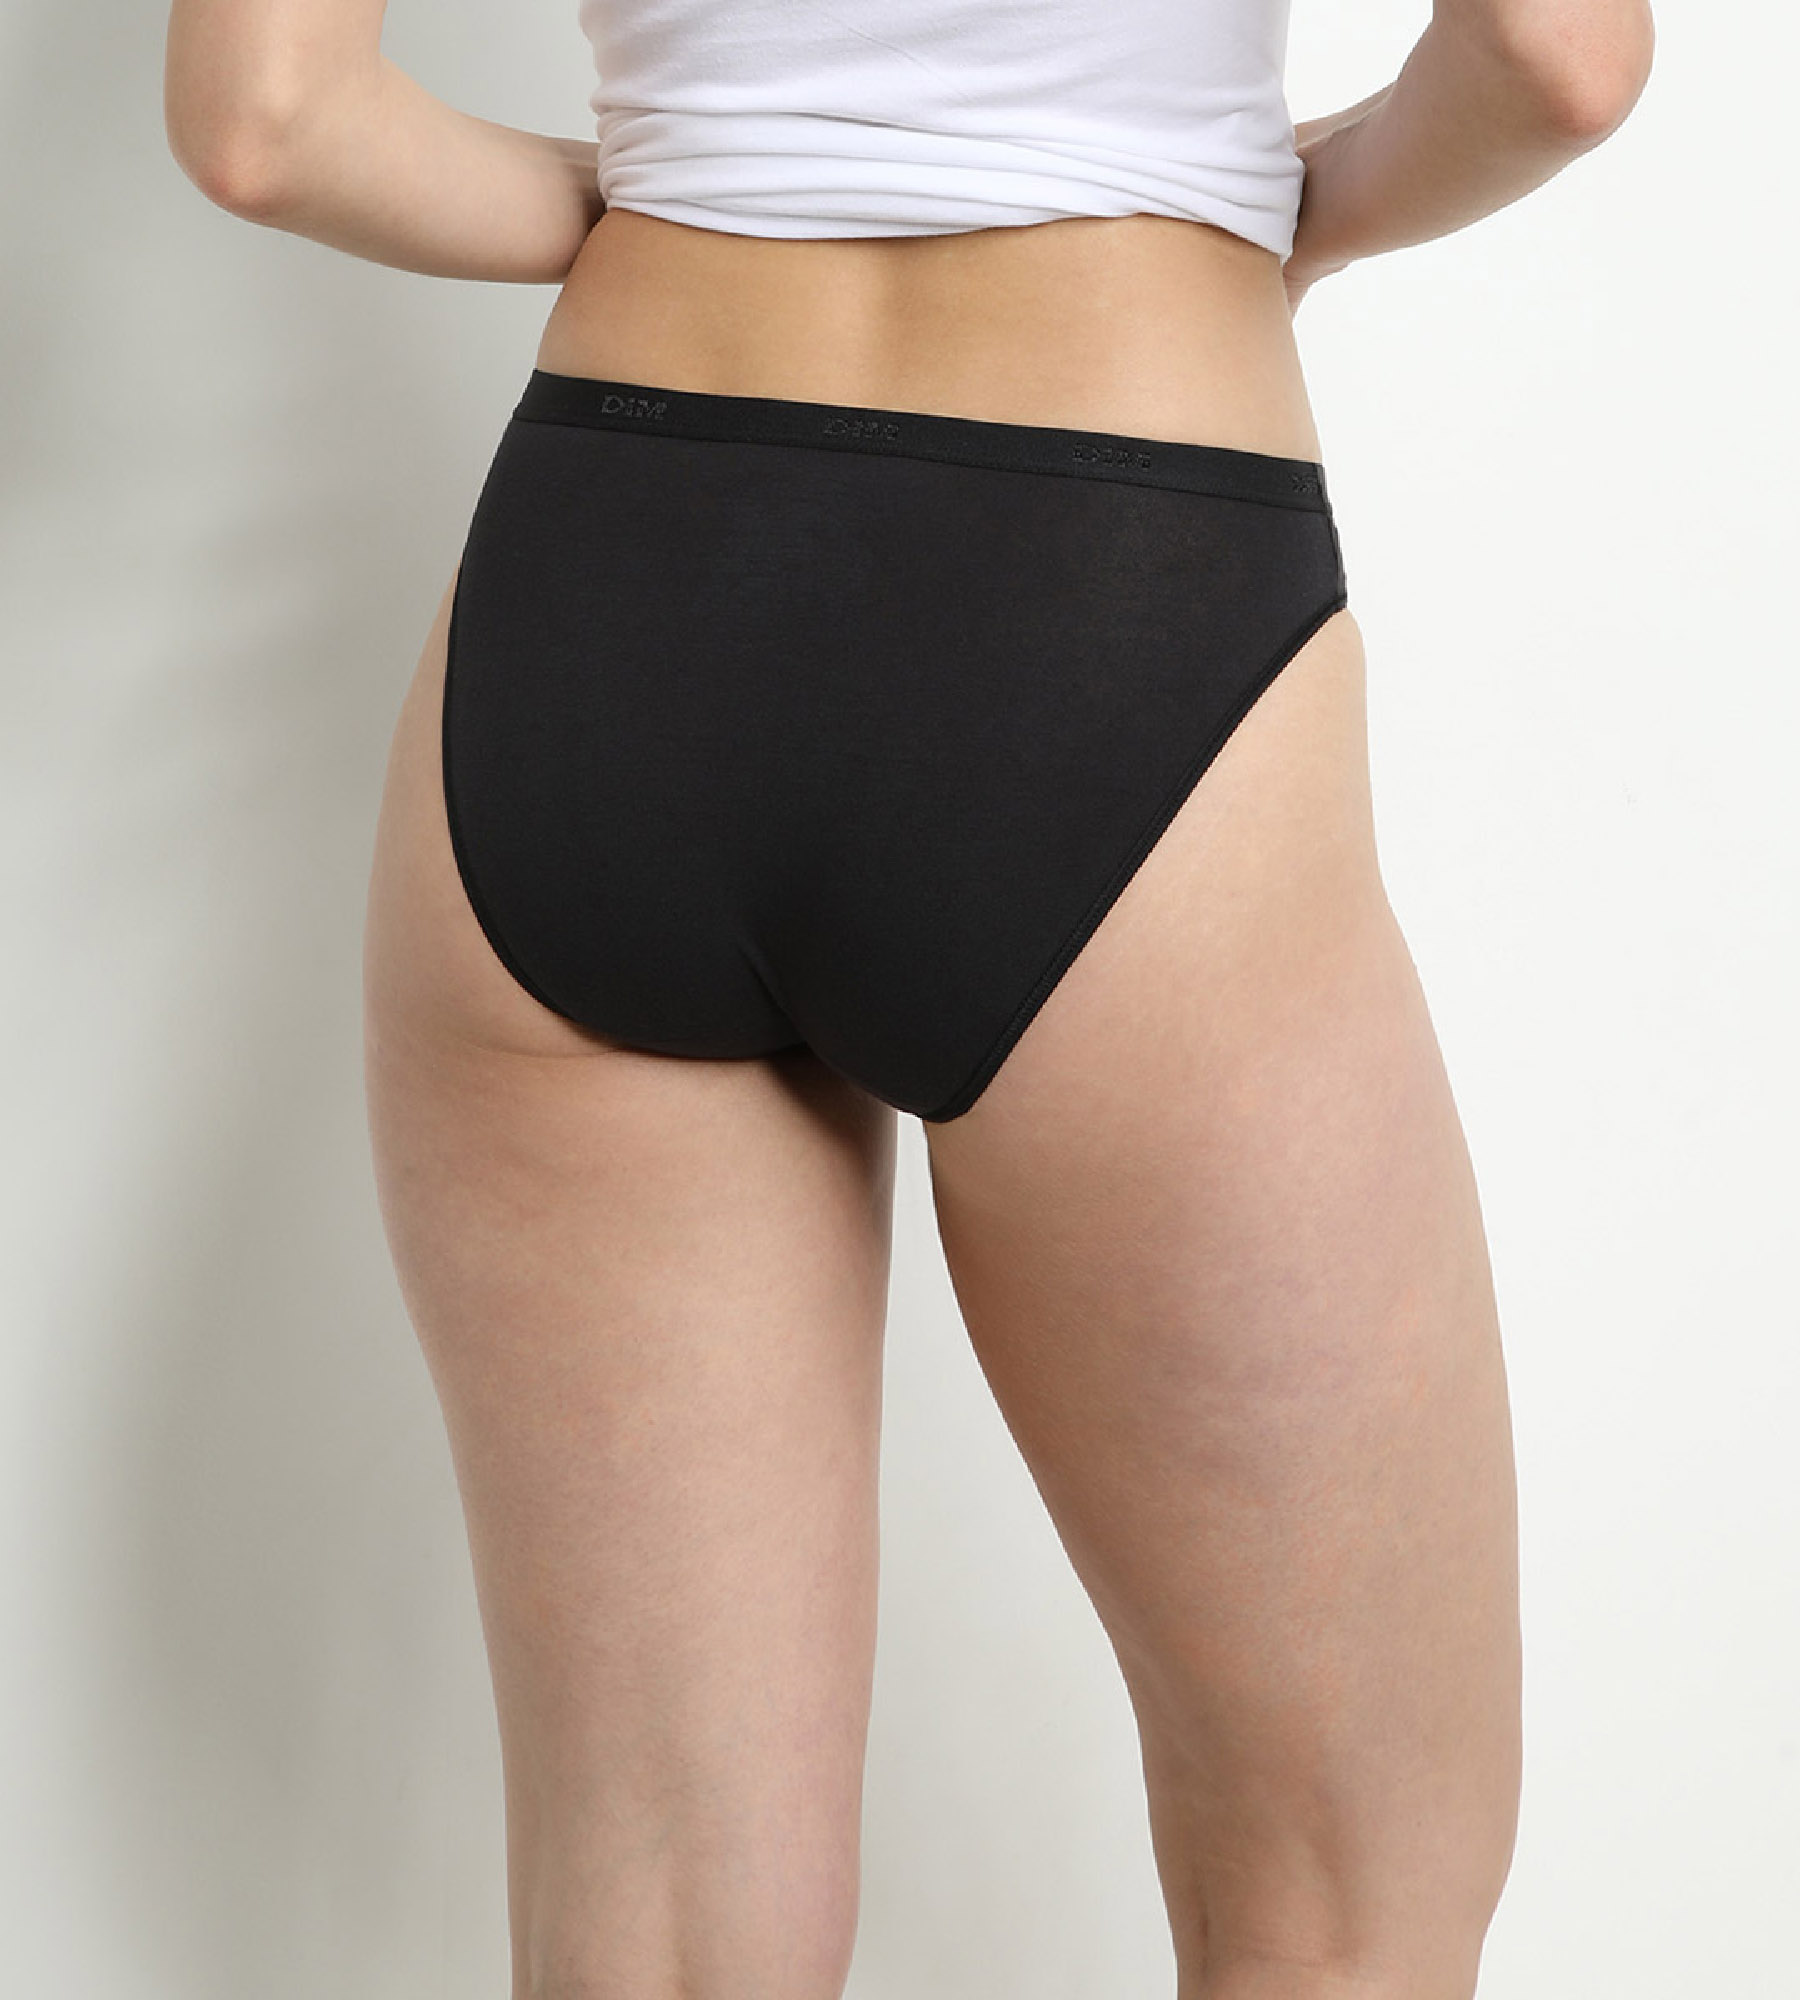 Pack of 3 pairs of Les Pockets Coton bikini knickers in black/white/grey